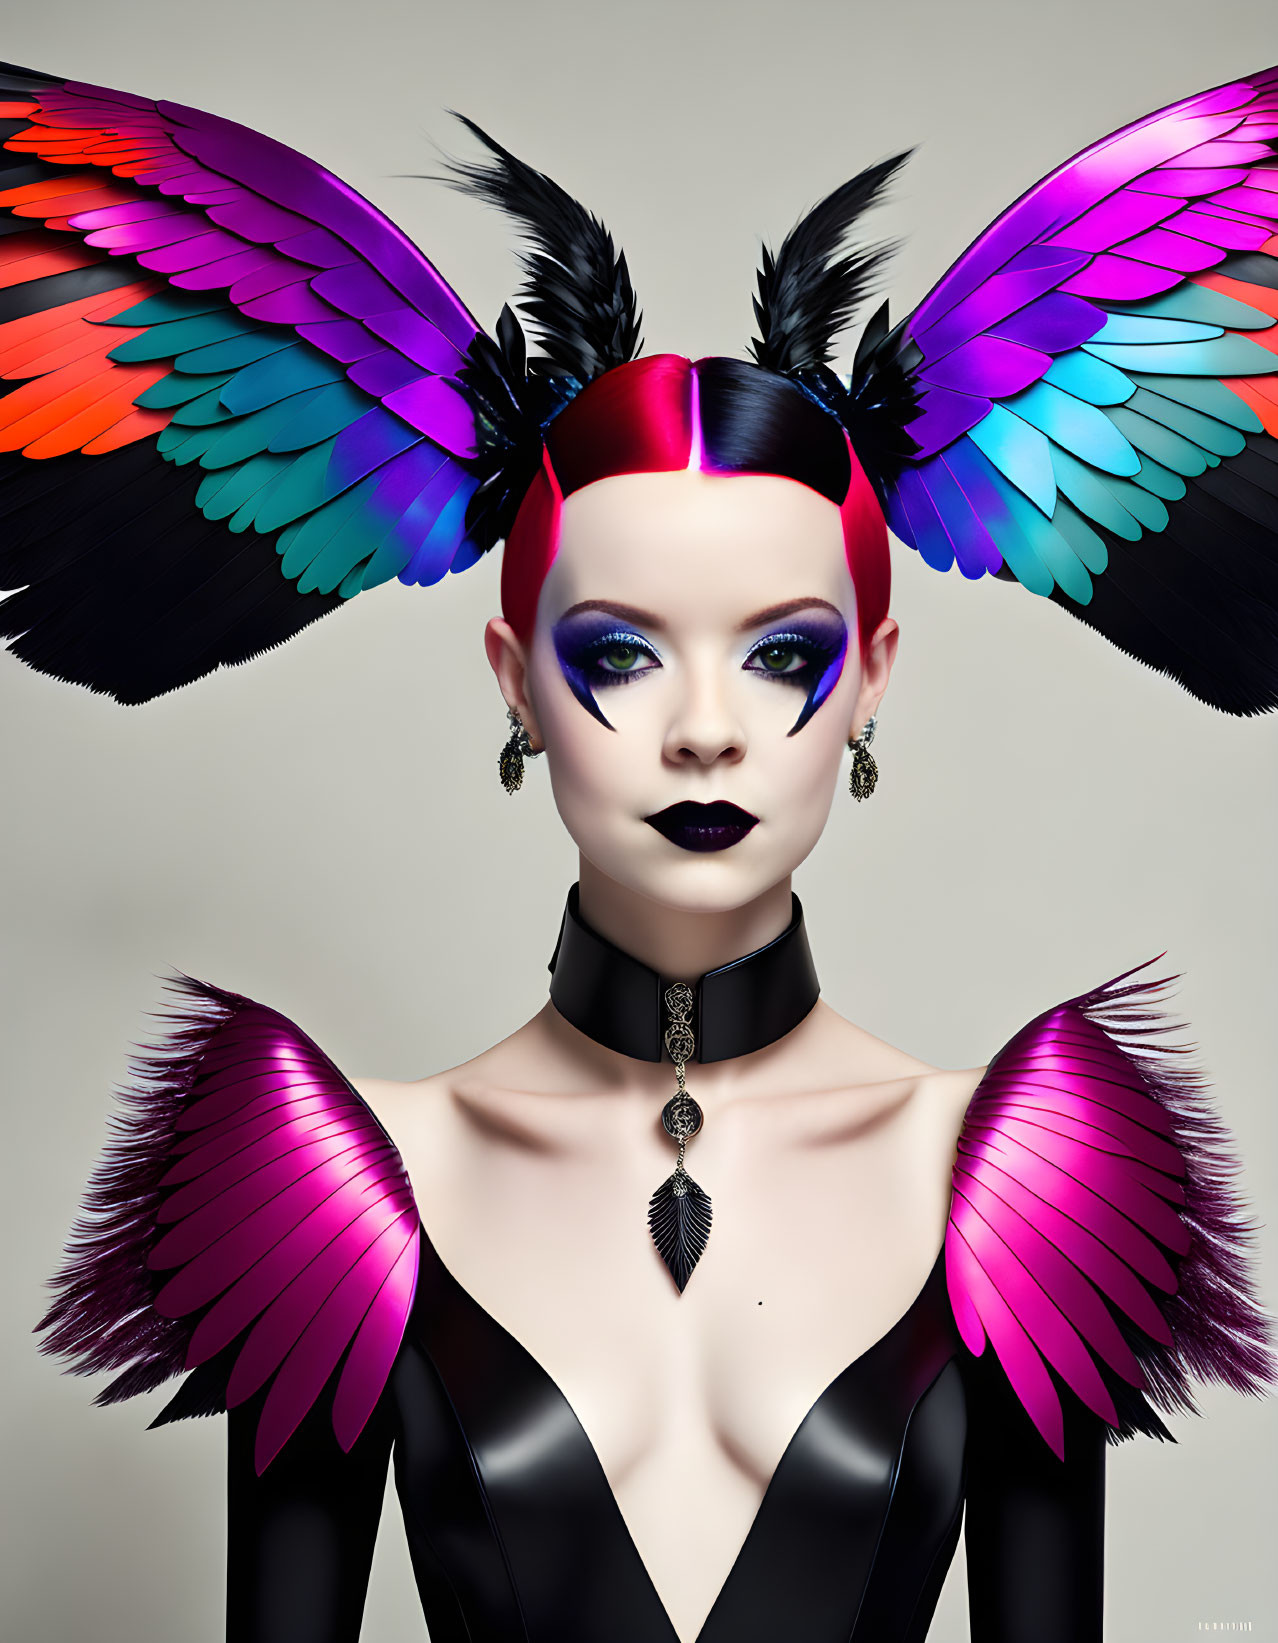 Vibrant surreal portrait with butterfly wings, dramatic makeup, and gothic choker